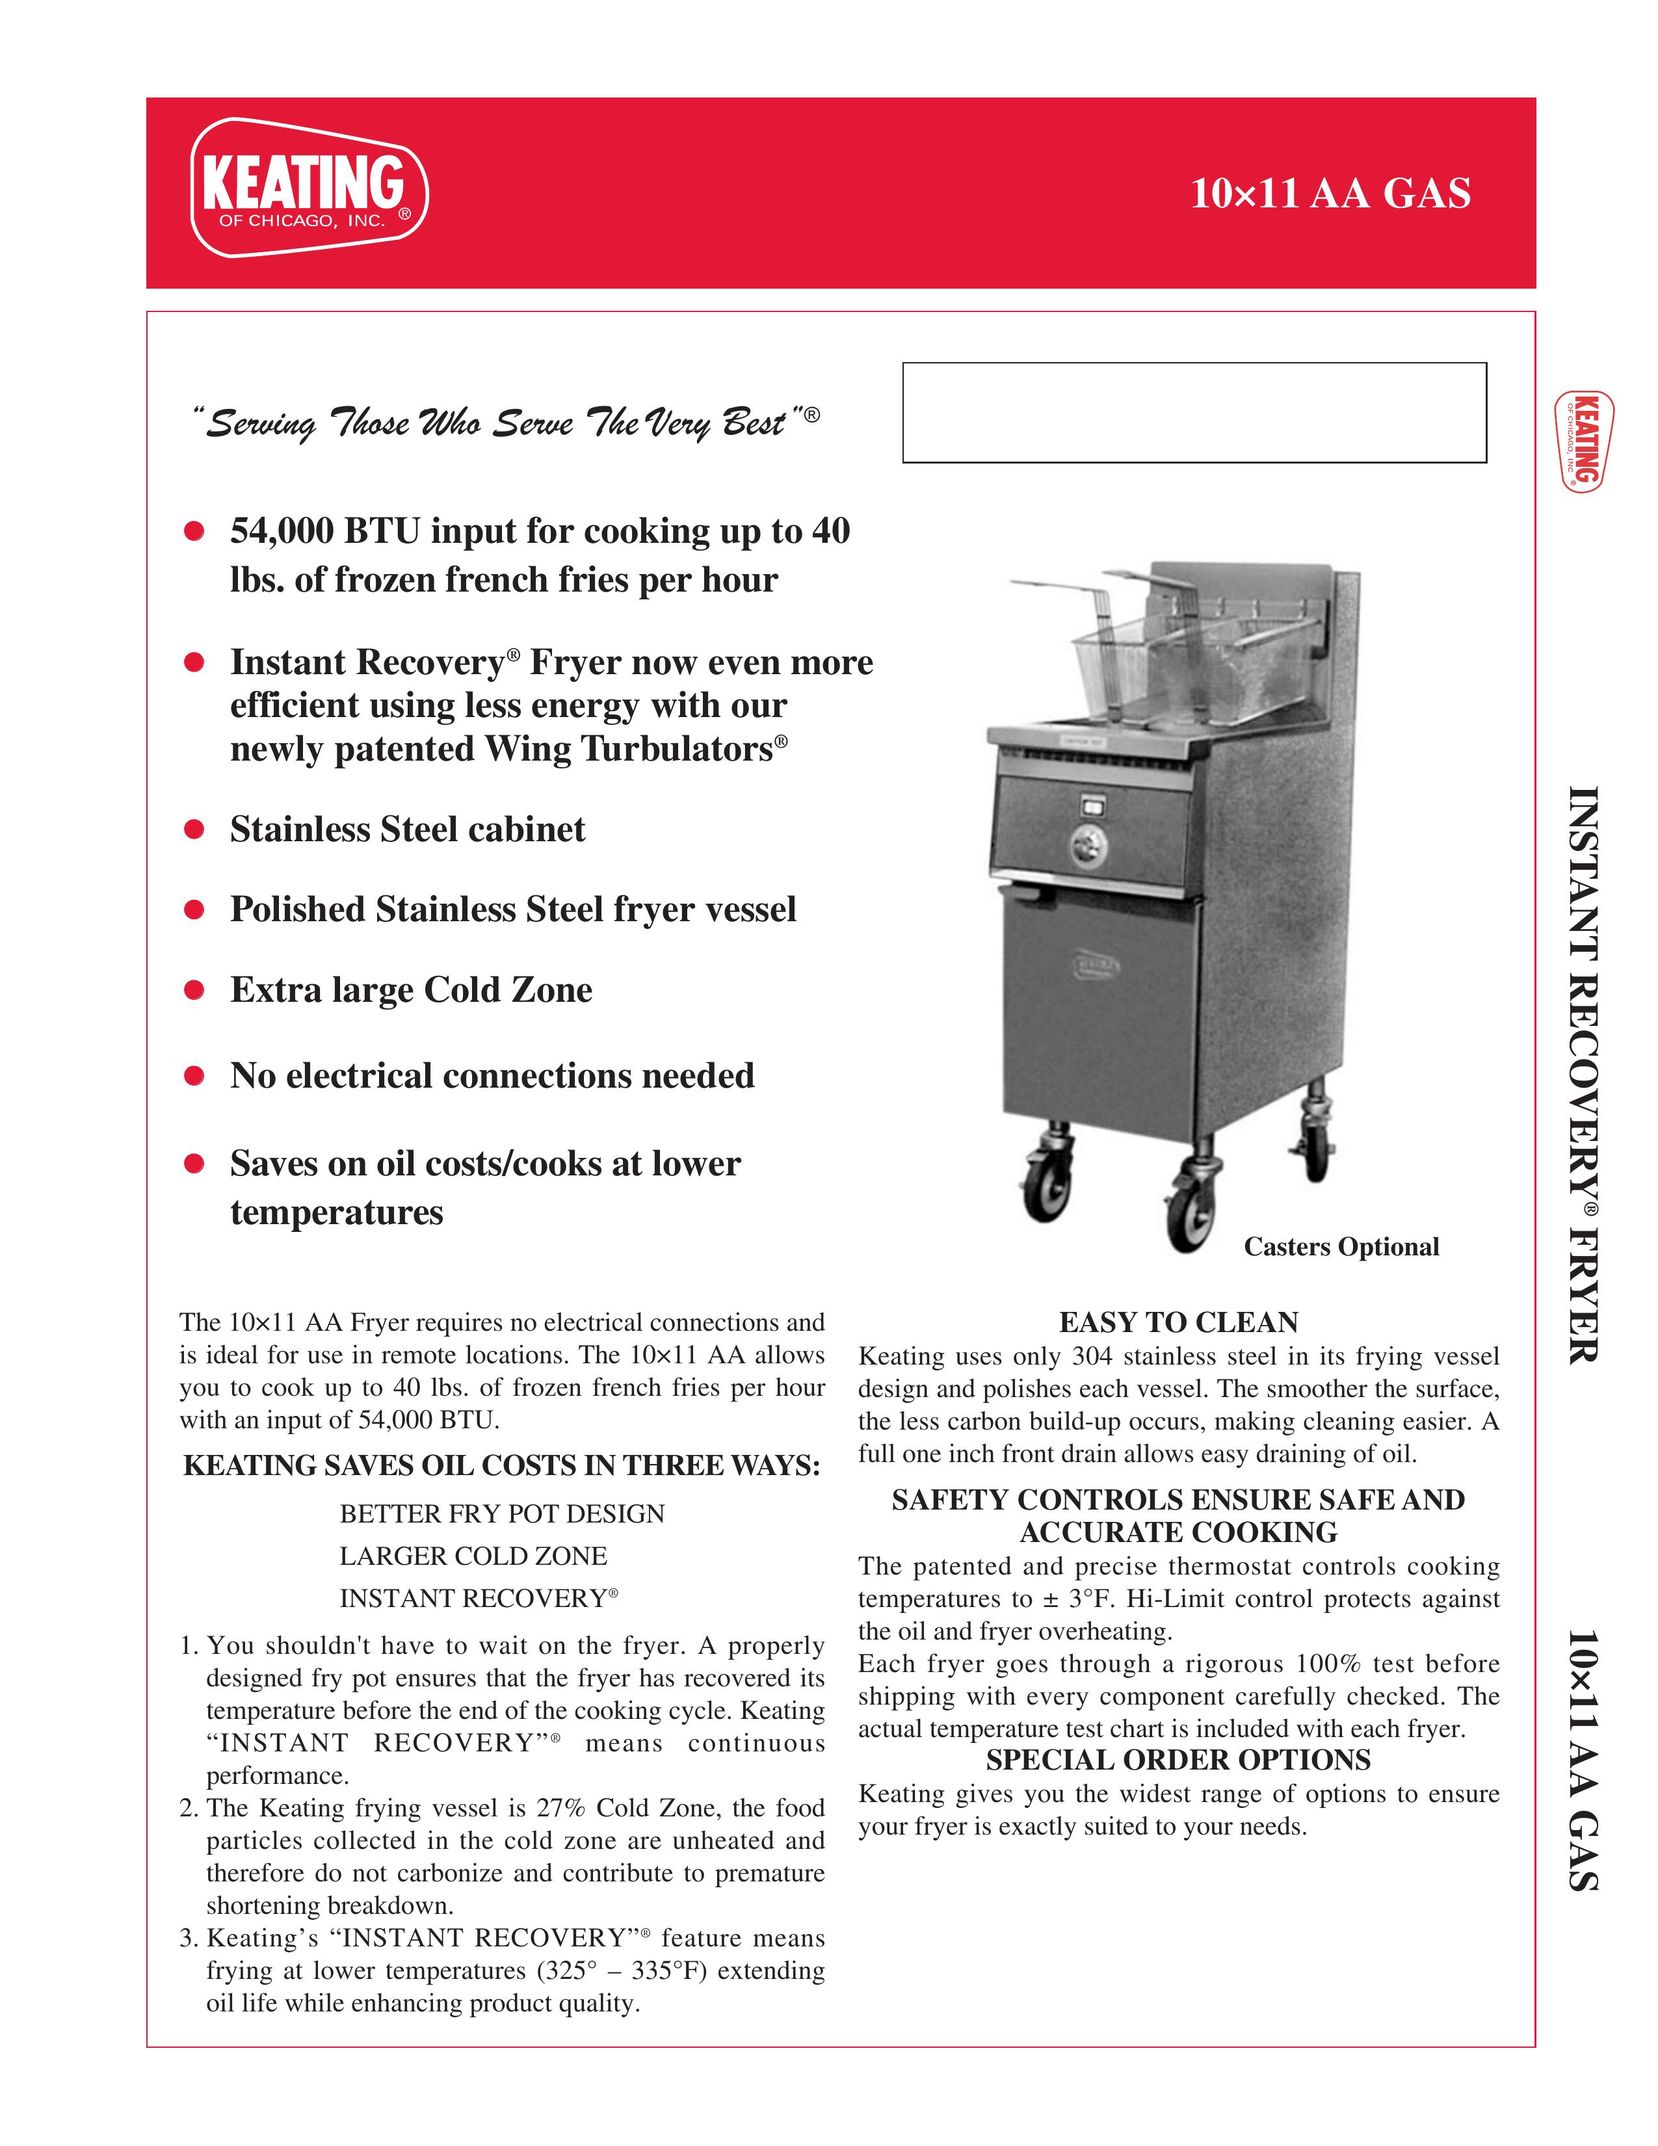 Keating Of Chicago 10x11AA Gas Fryer User Manual